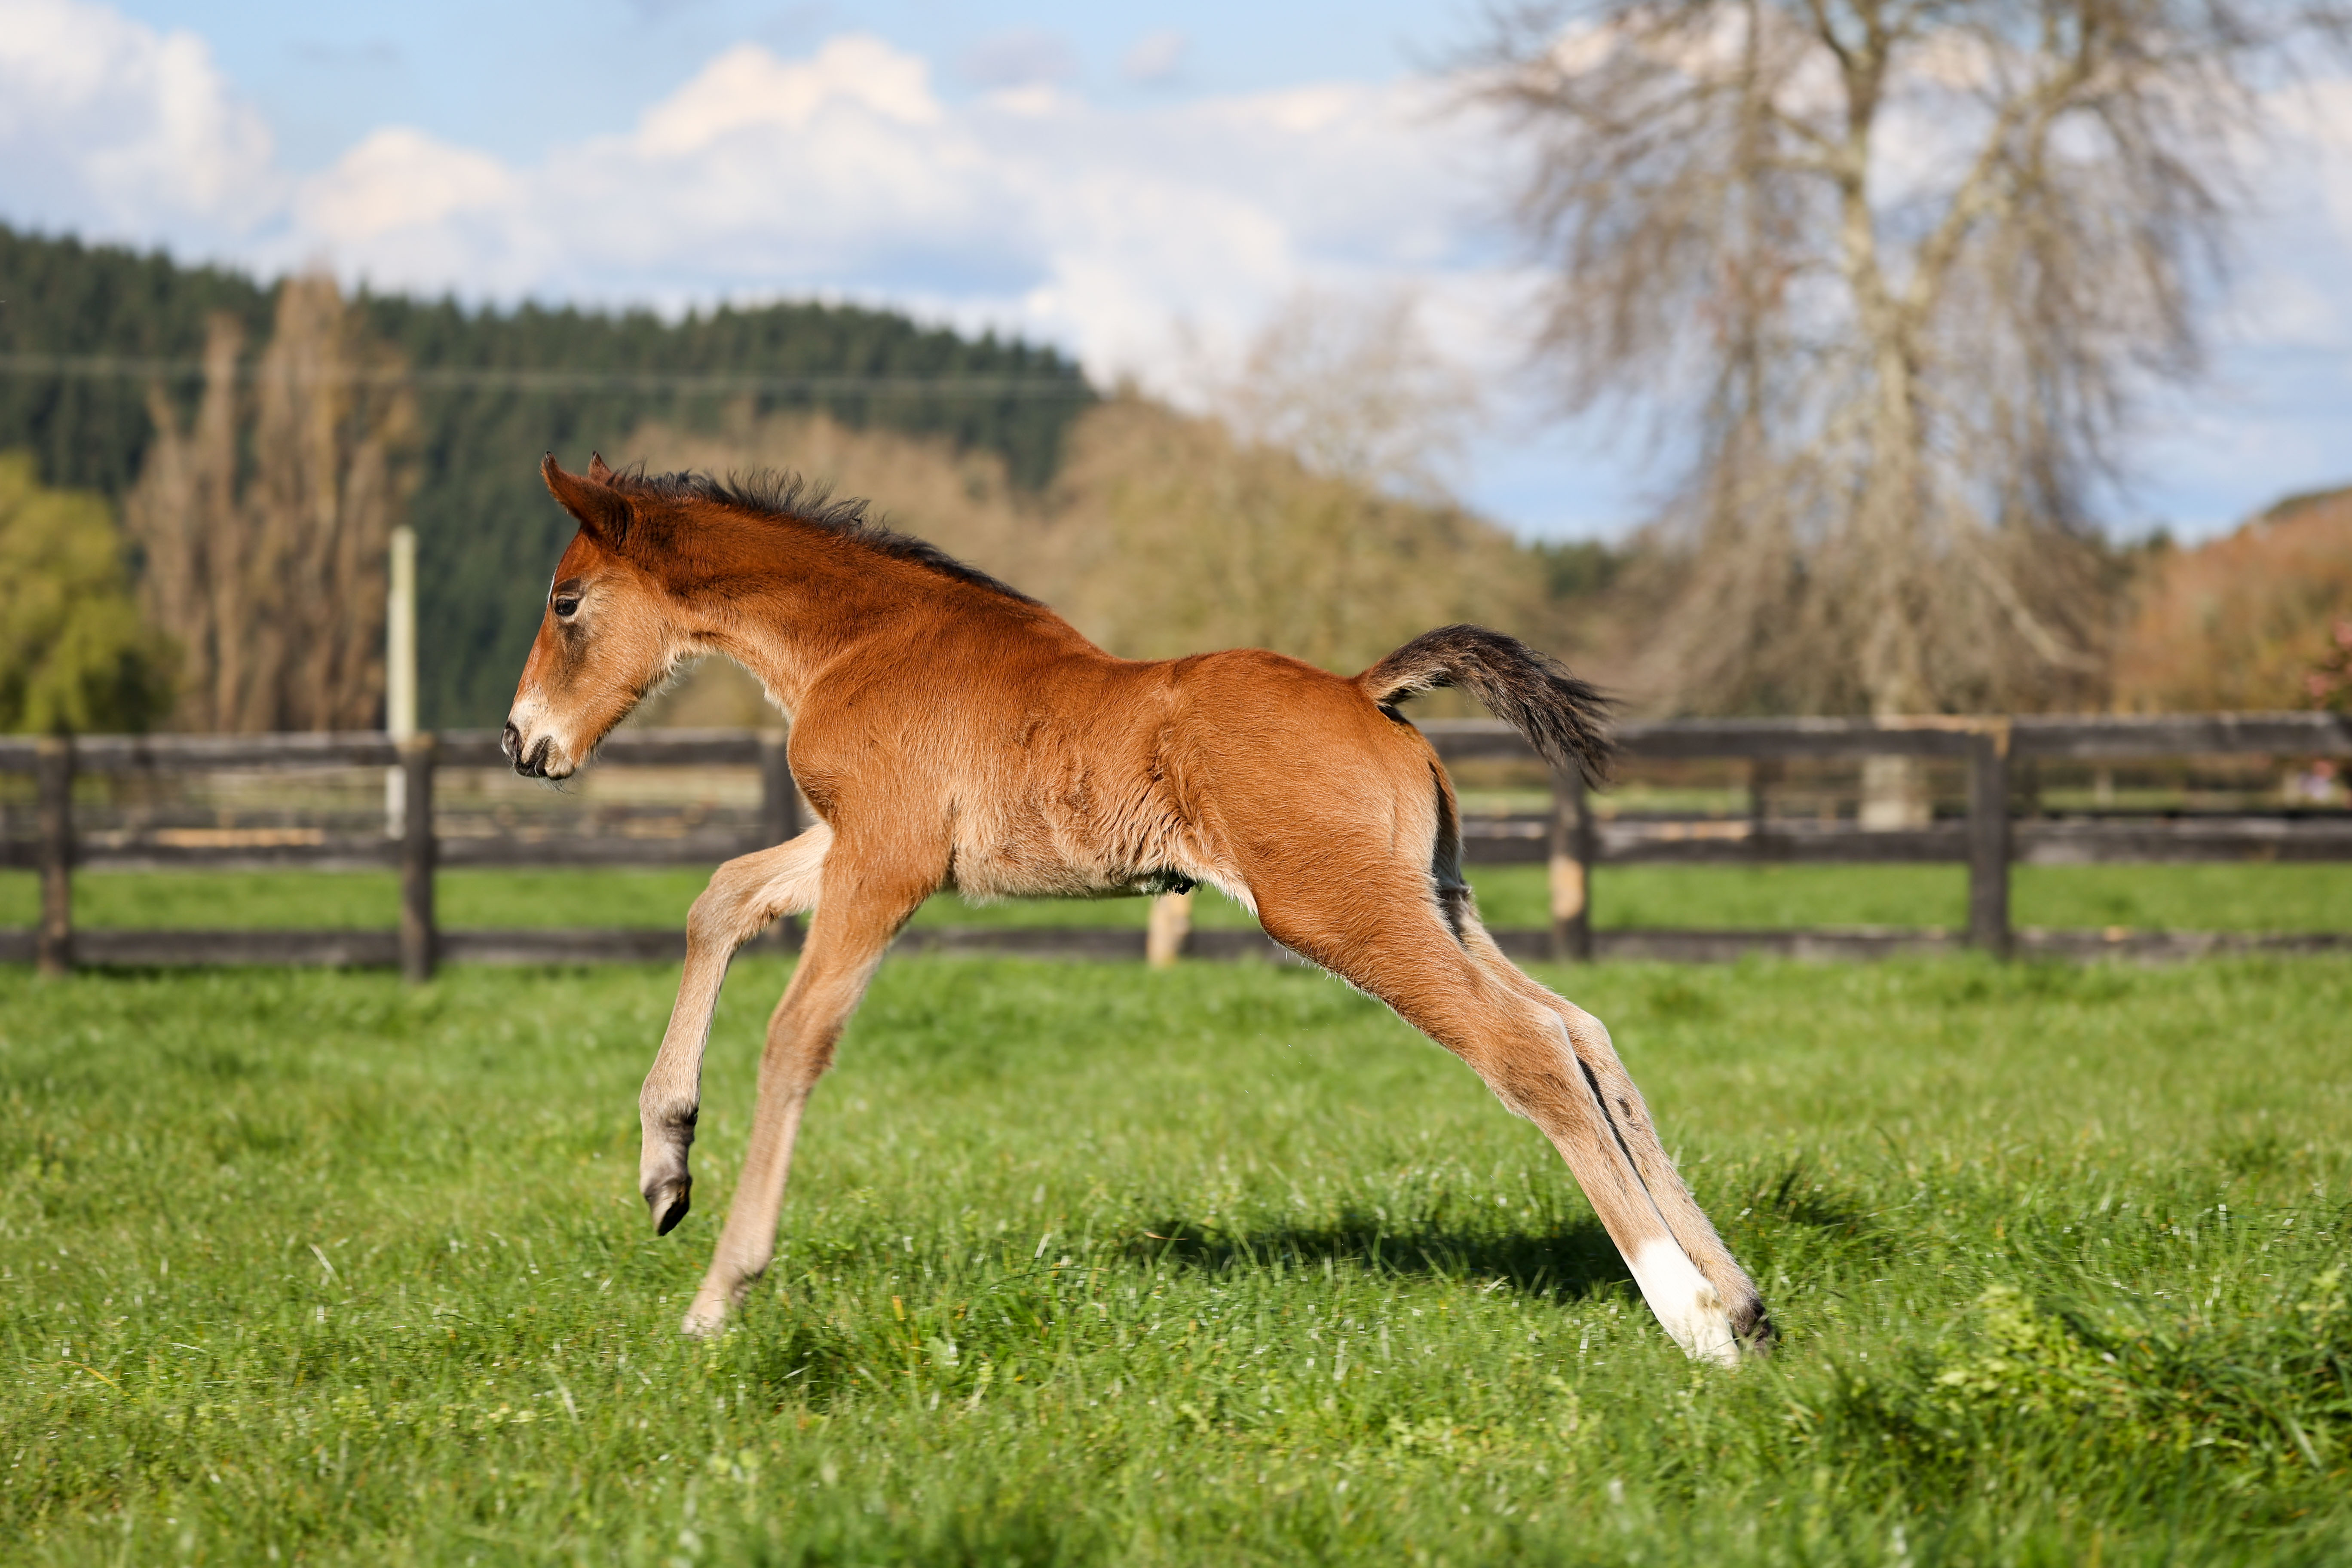 First King Of Comedy foal is full of quality